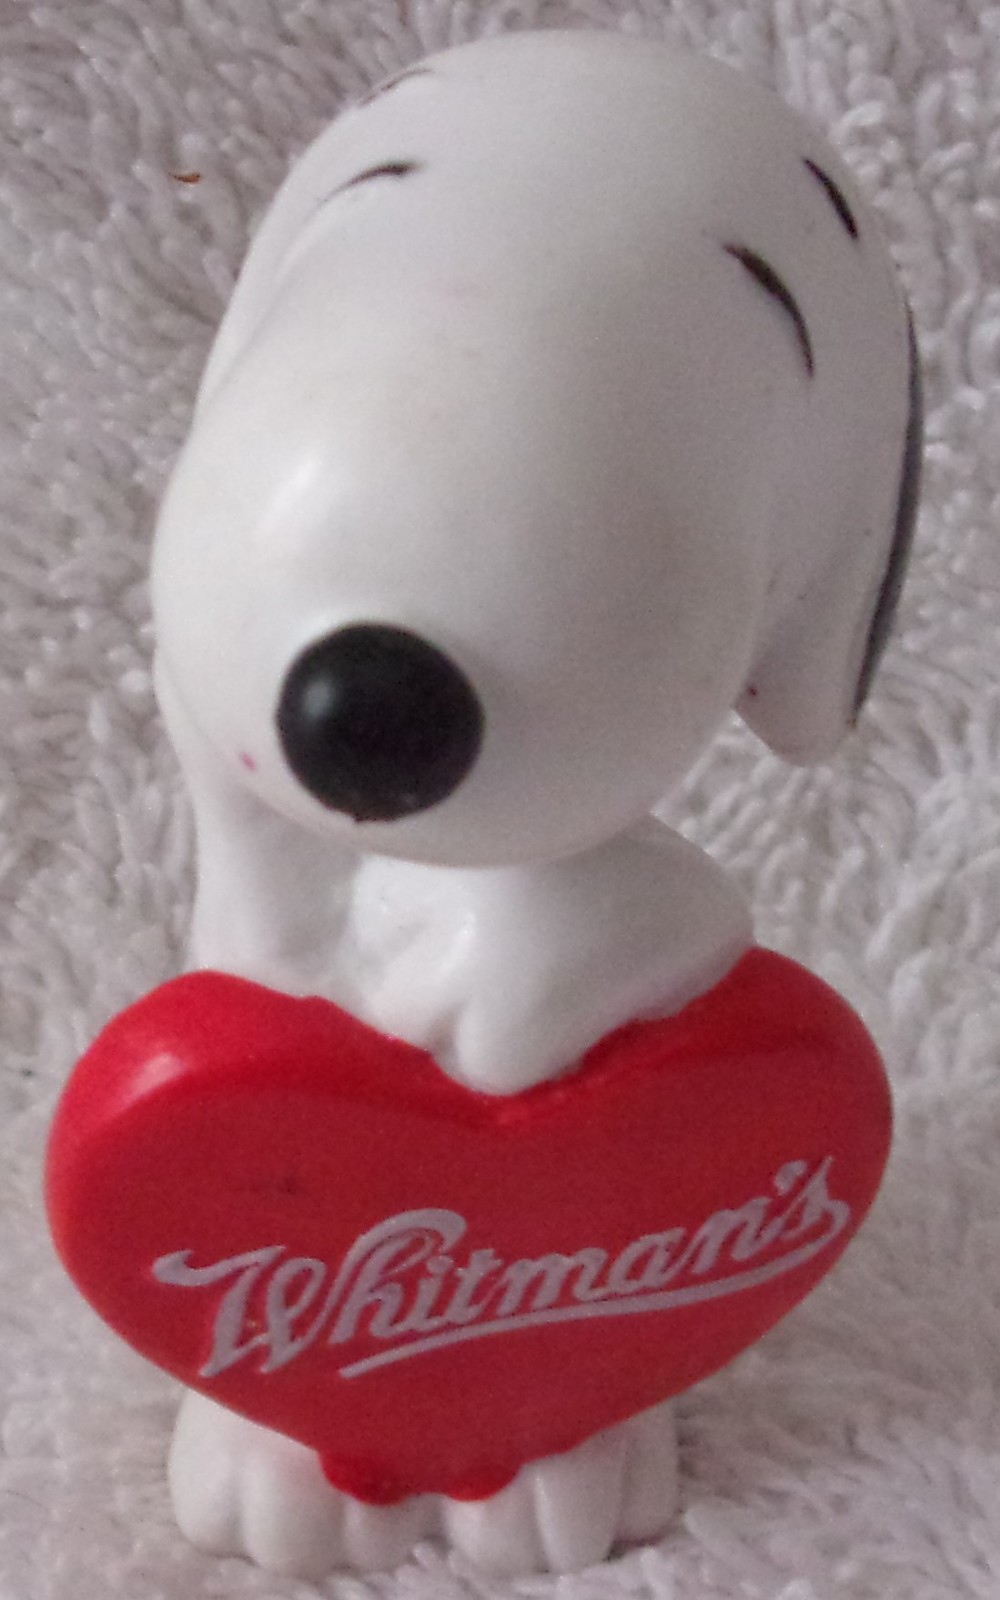 Primary image for Peanuts Snoopy Whitmans Candy Chocolate Heart PVC Figure Cake Topper Valentines